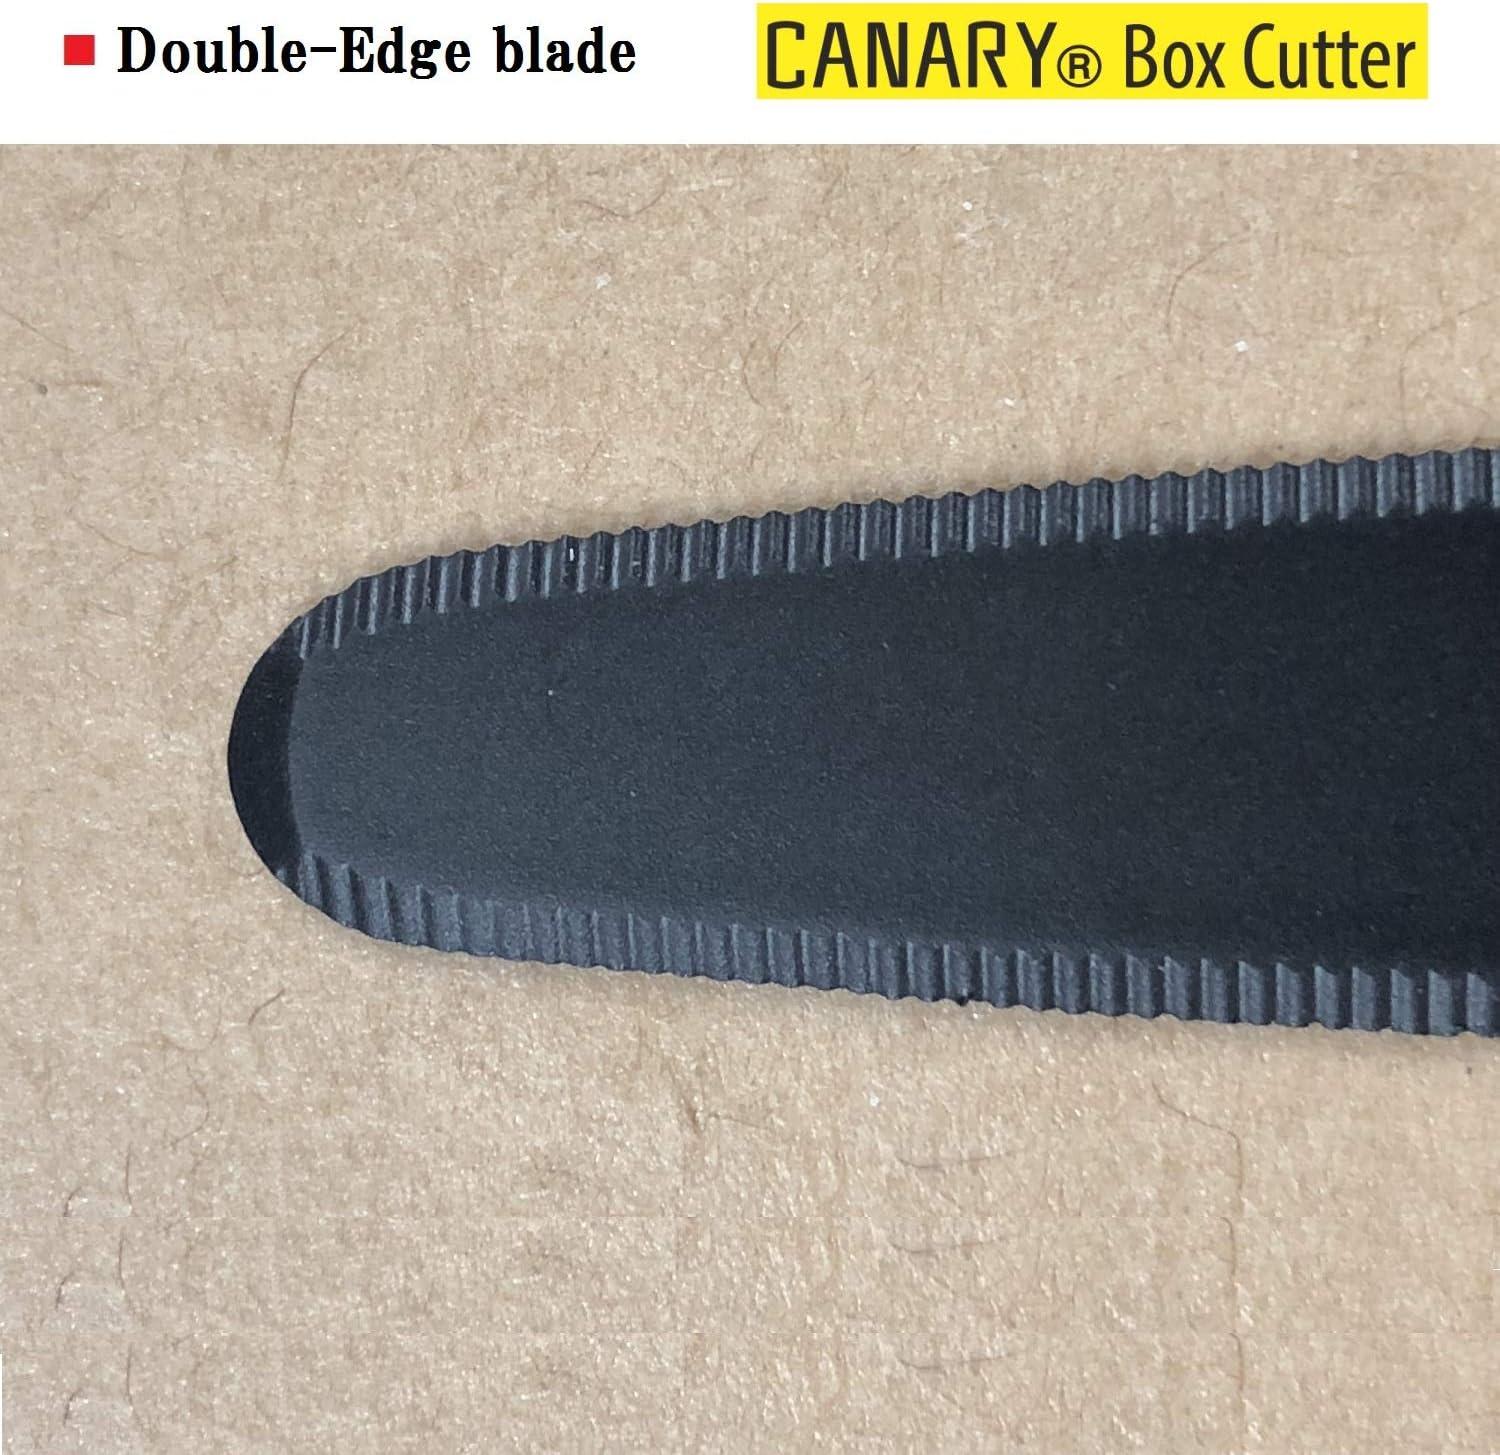 CANARY Corrugated Cardboard Cutter Fluorine Coating Yellow From Japan